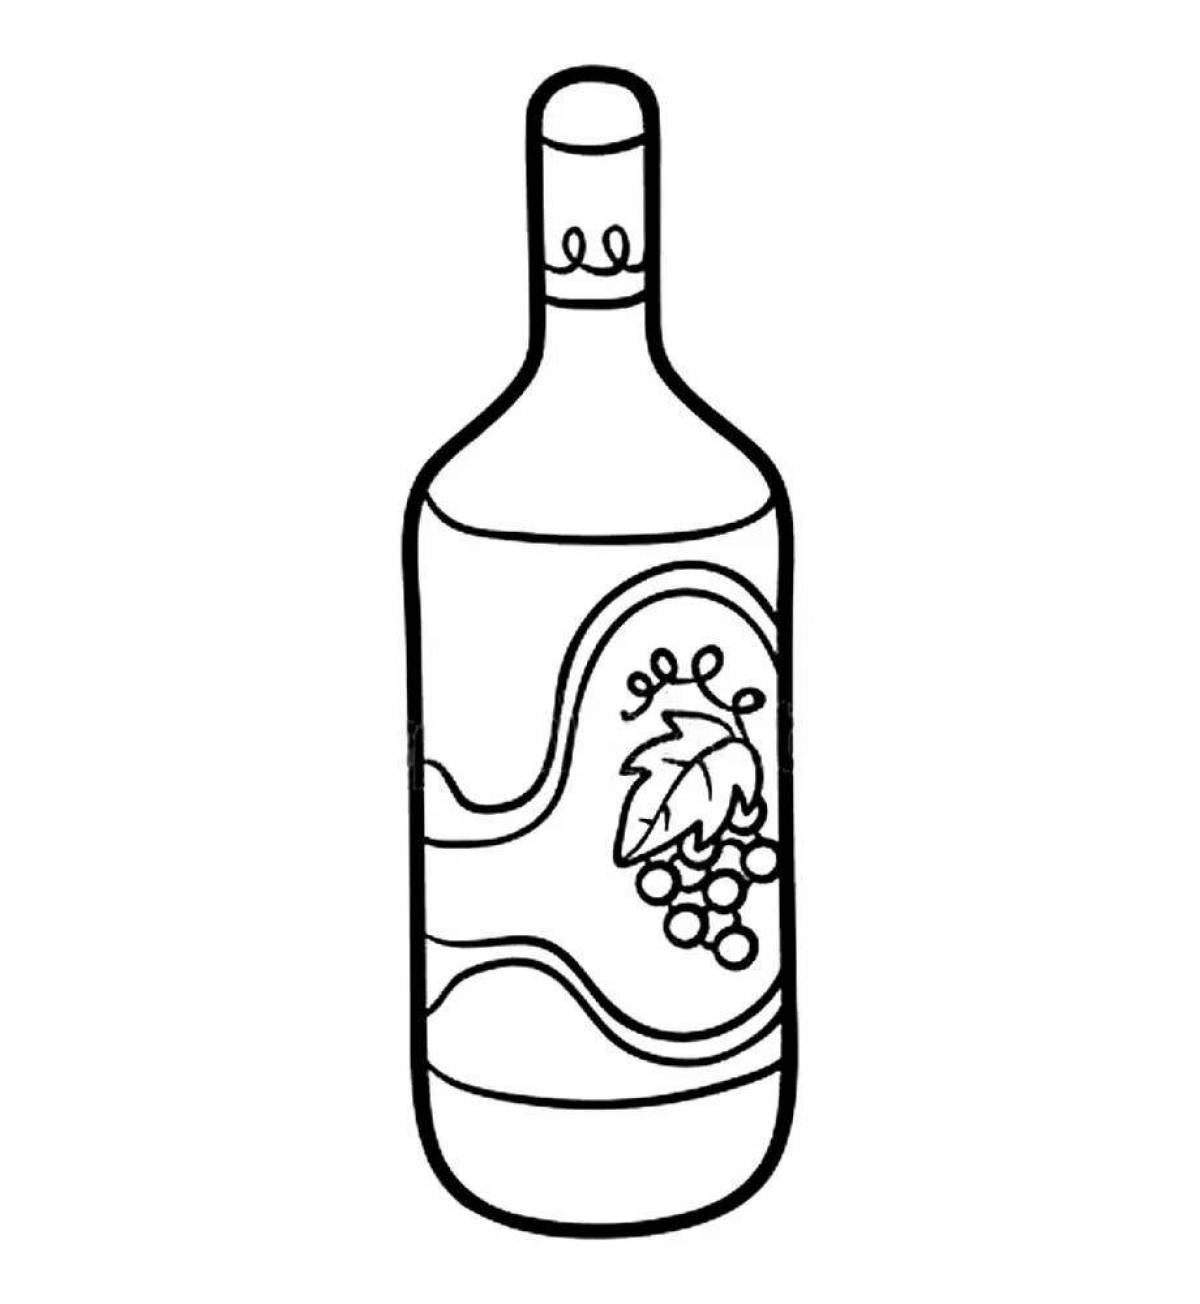 Fun coloring book with alcohol